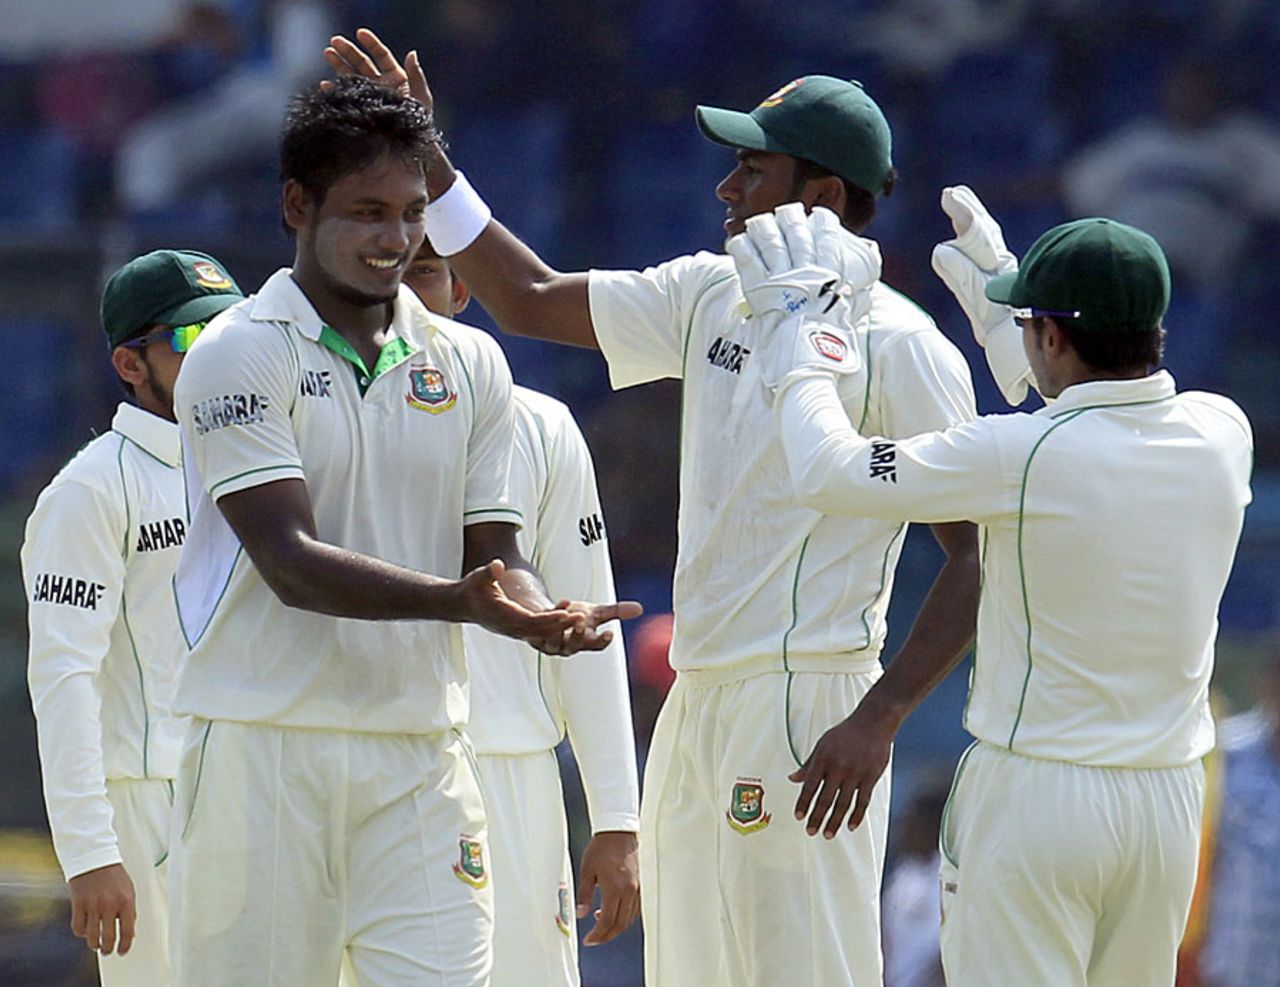 Abul Hasan celebrates a wicket with his team-mates, Sri Lanka v Bangladesh, 1st Test, Galle, 2nd day, March 9, 2013